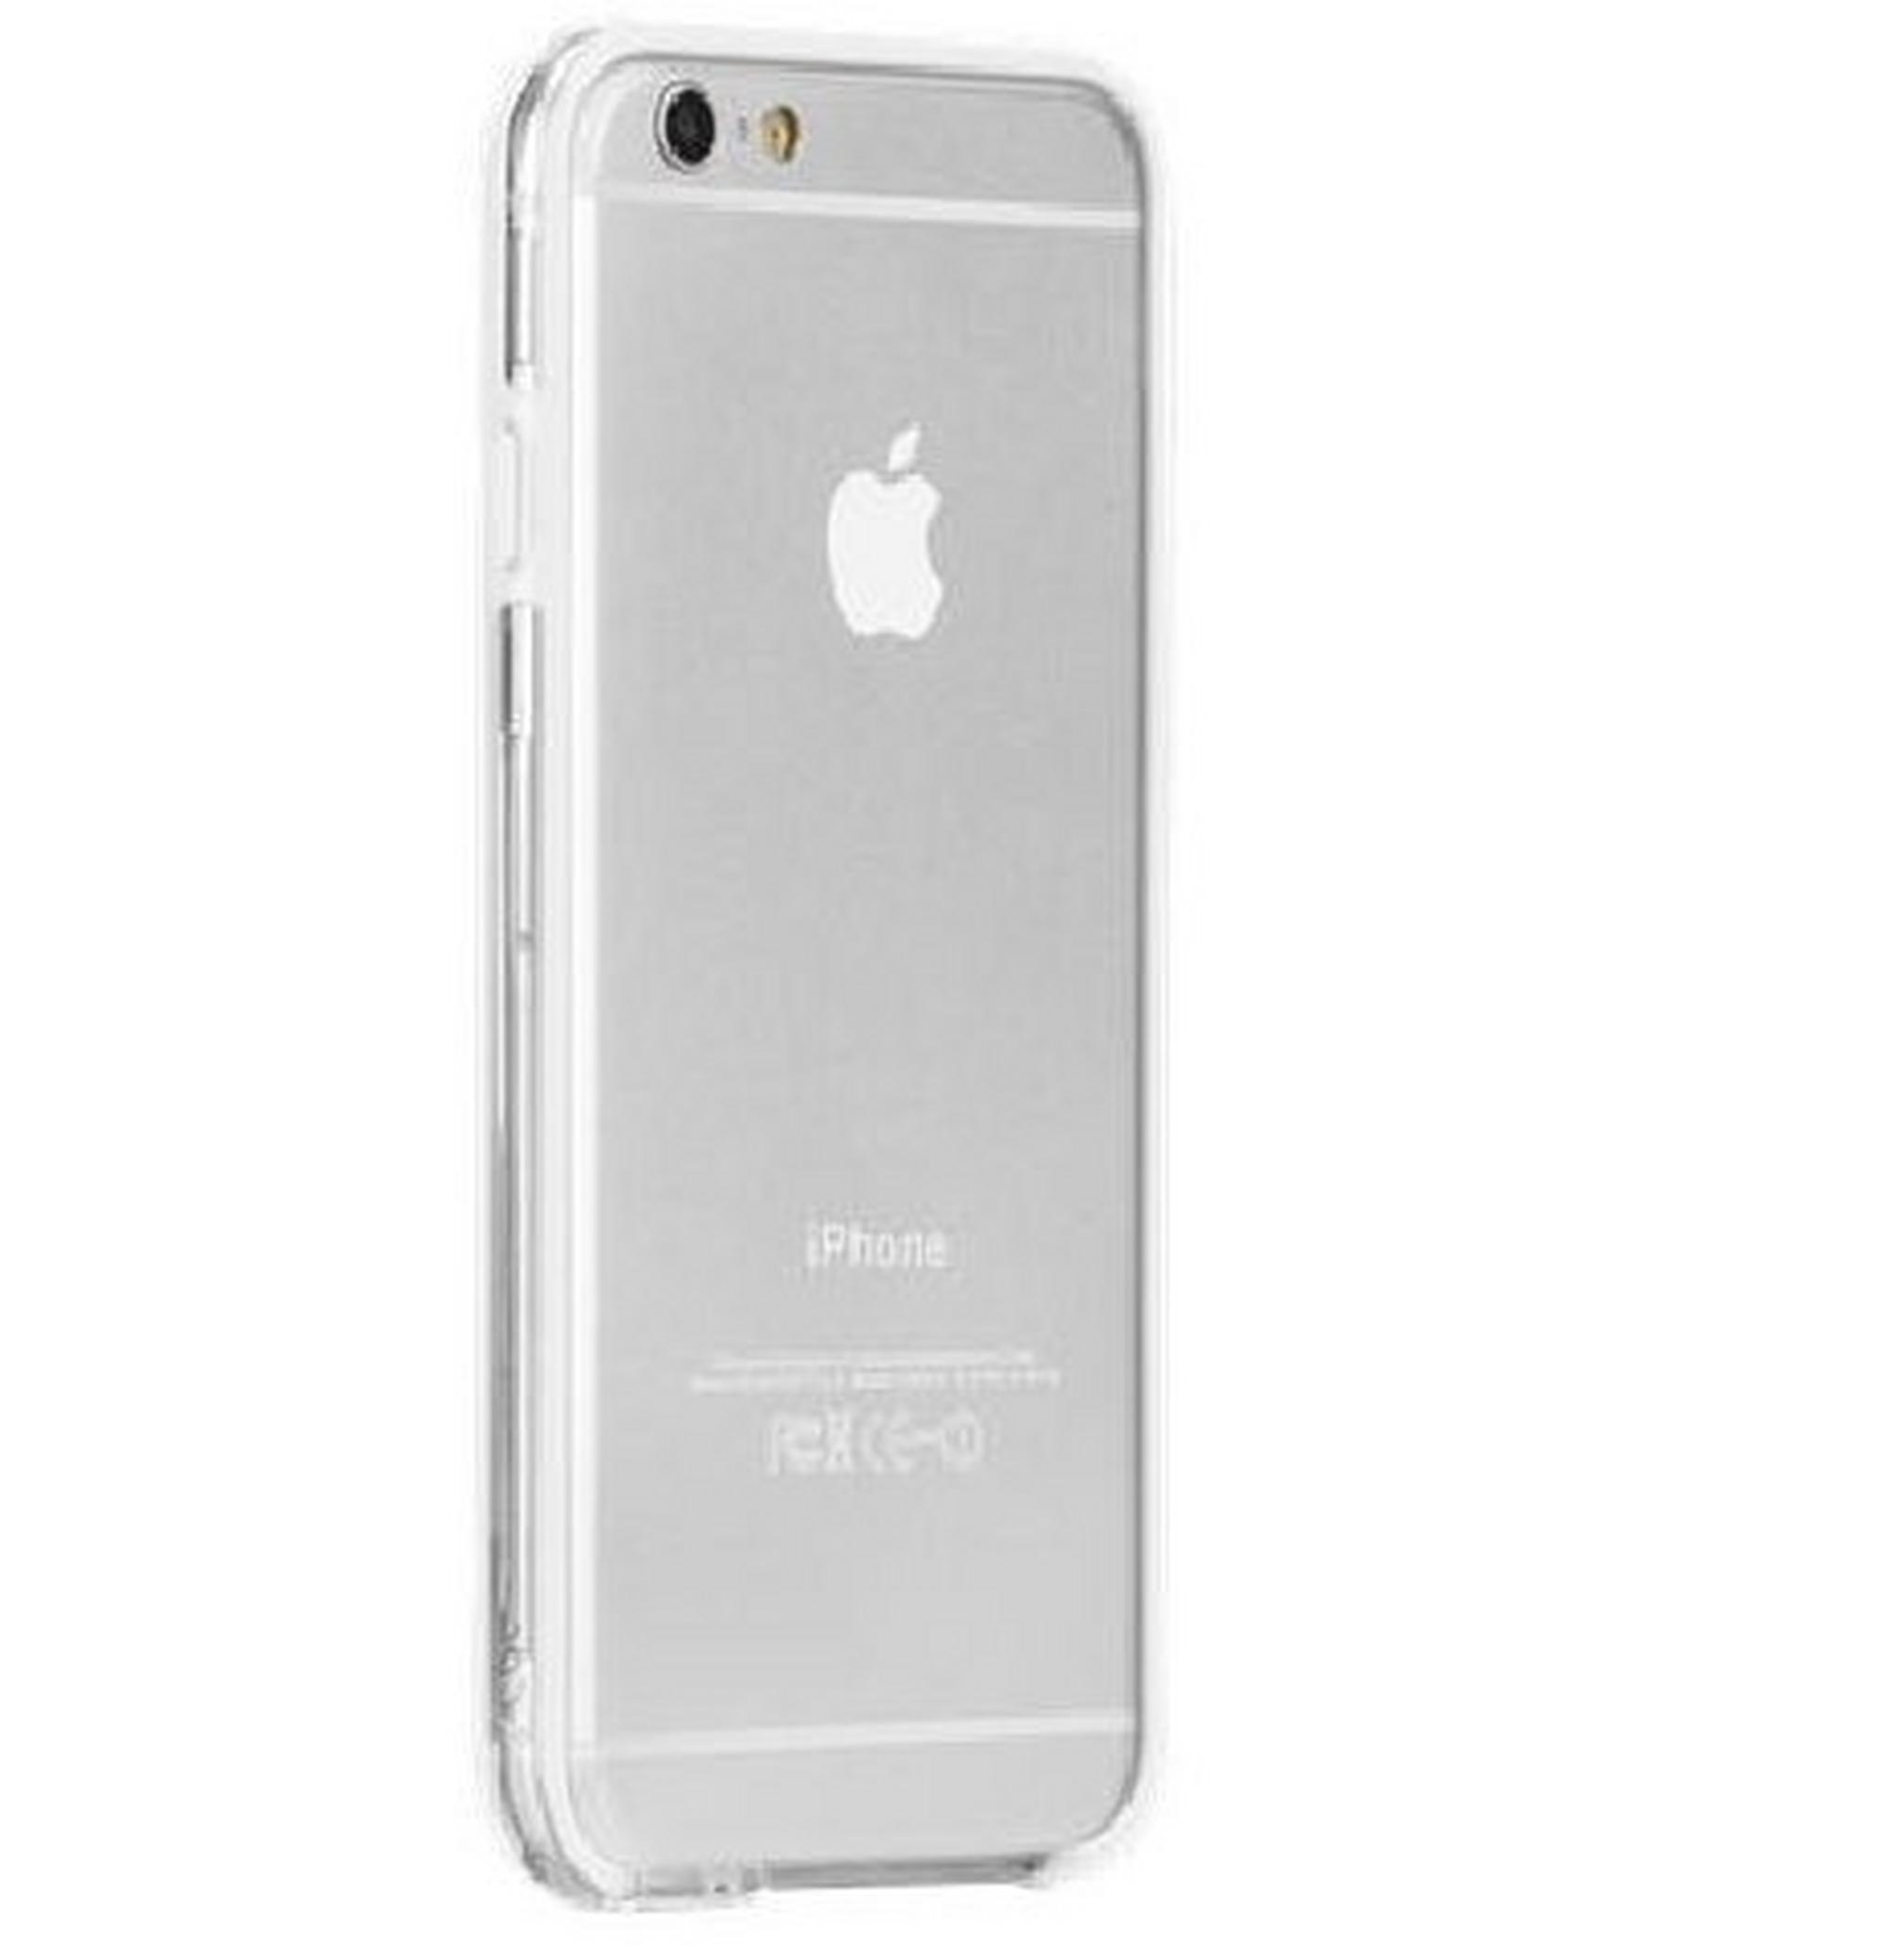 Case Mate Tough Frame Case for iPhone 6 - Clear White